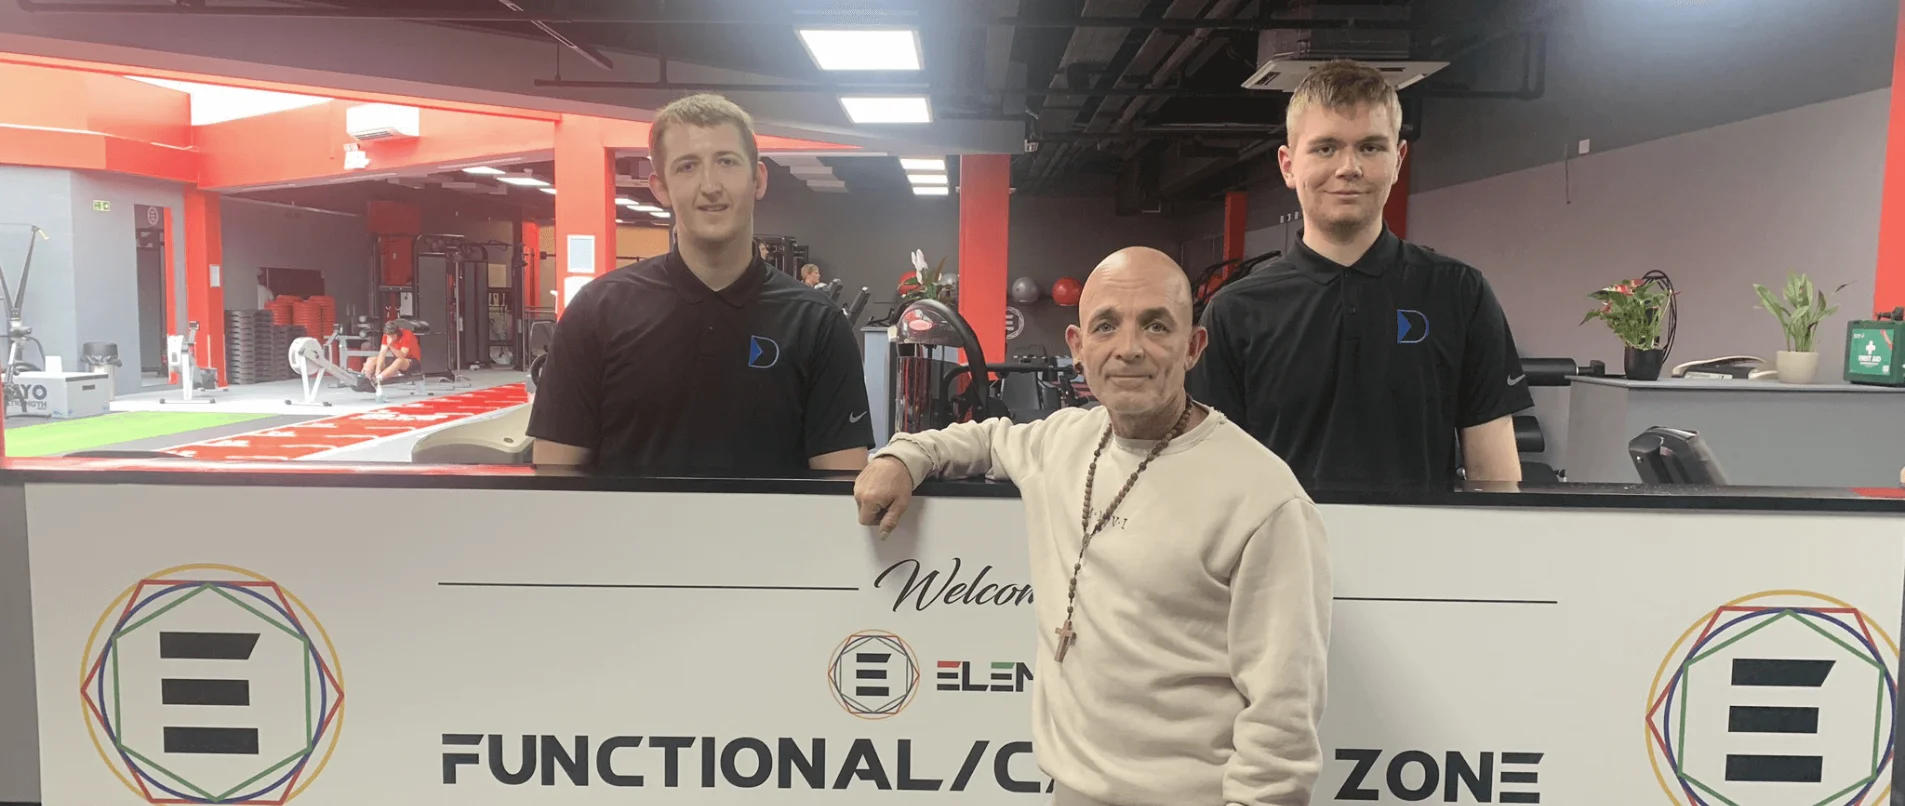 A photo of Ethan and Danny with Carl from Elements Fitness & Wellbeing in Stafford